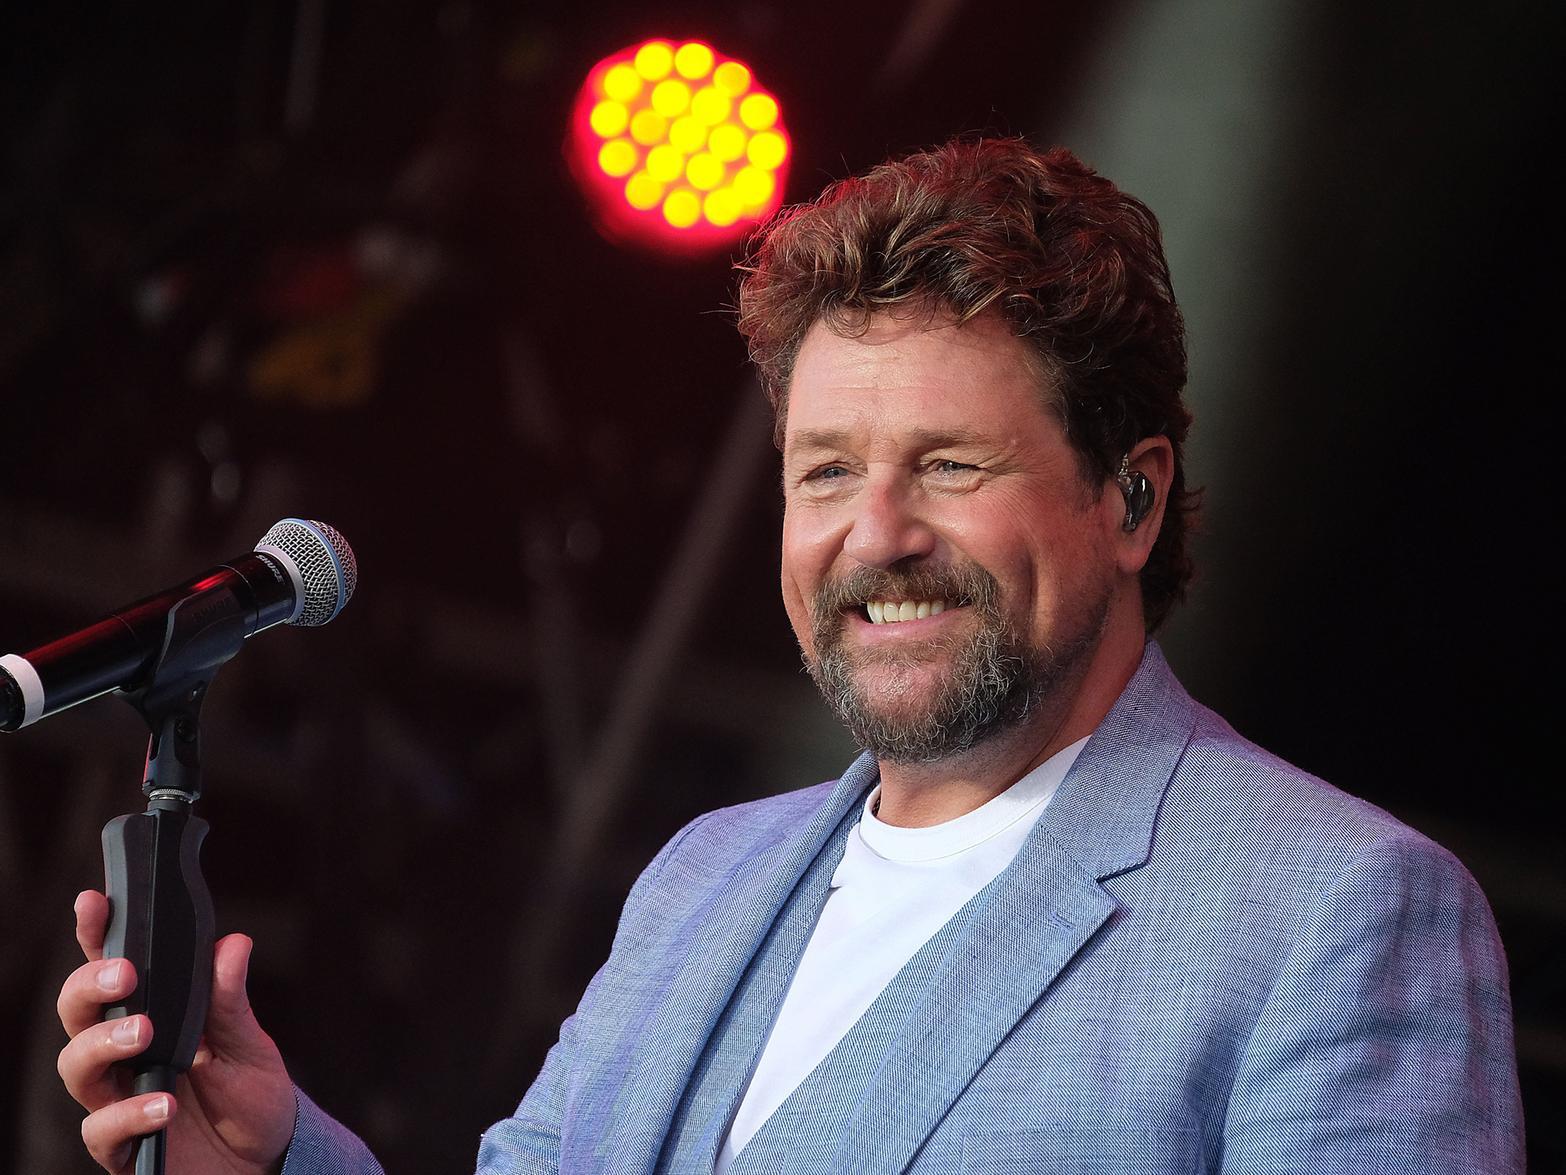 Michael Ball fans flocked to Halifax to see the singer and muscial theatre performer's show back in 2003.